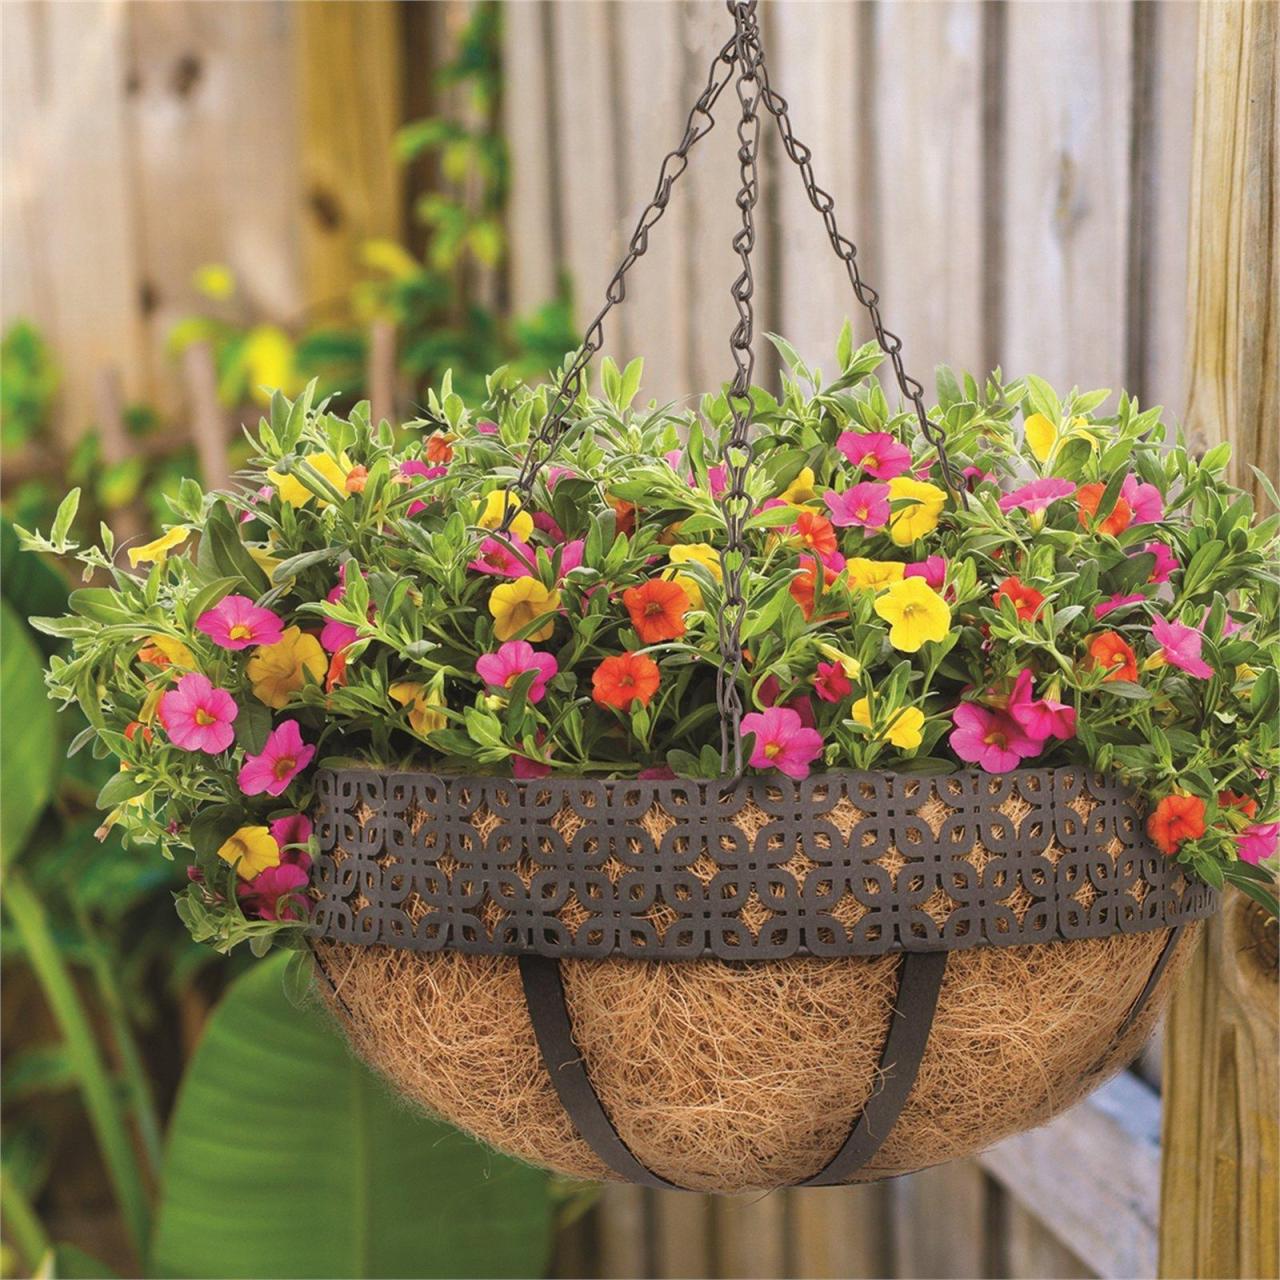 Hanging Plants Indoor | Cane Hanging Baskets: A Versatile Addition to Your Home Decor from Bunnings